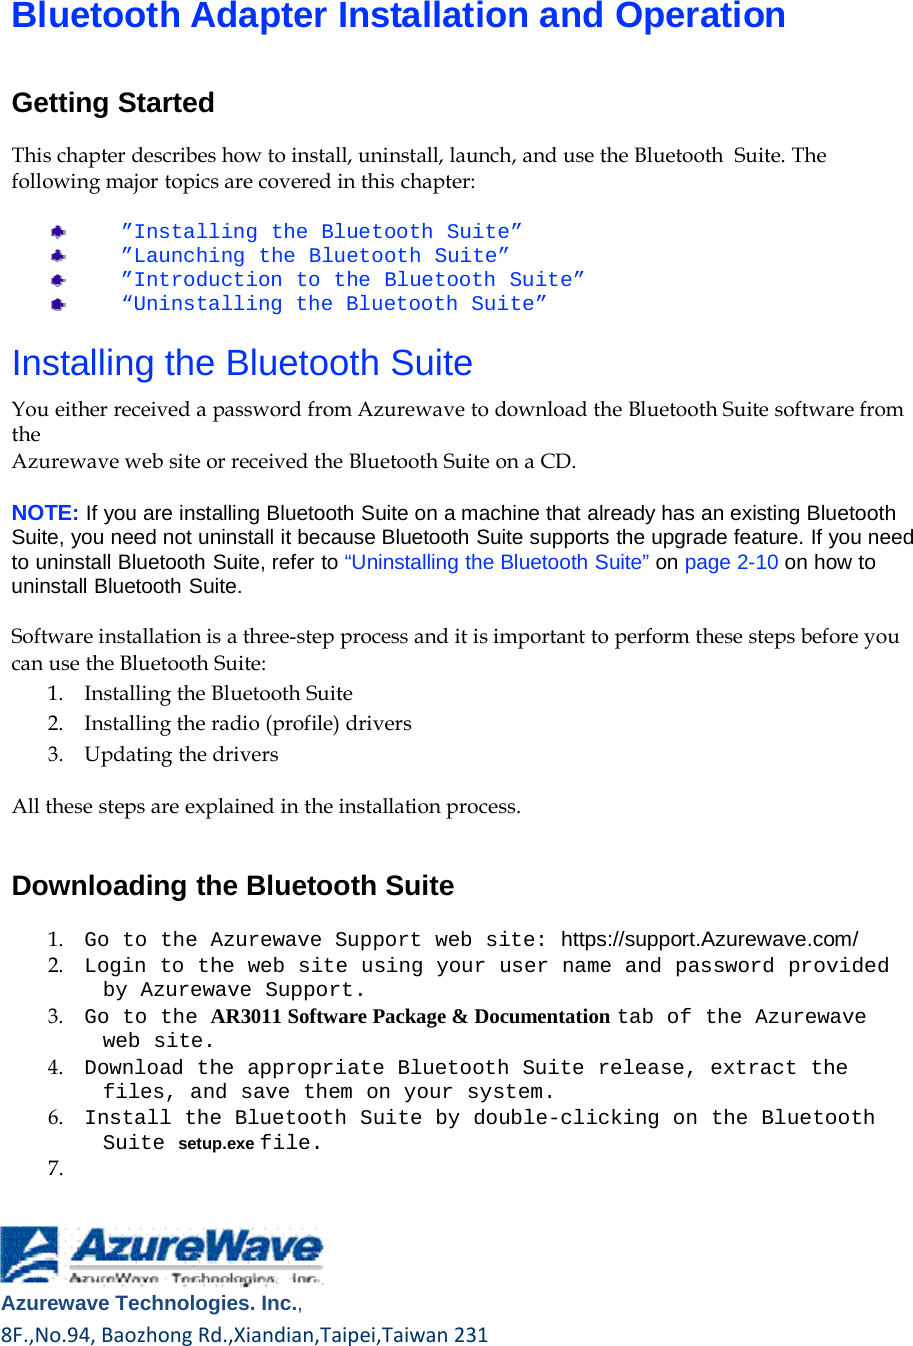        Bluetooth Adapter Installation and Operation   Getting Started  This chapter describes how to install, uninstall, launch, and use the Bluetooth  Suite. The following major topics are covered in this chapter:  ”Installing the Bluetooth Suite” ”Launching the Bluetooth Suite” ”Introduction to the Bluetooth Suite” “Uninstalling the Bluetooth Suite”  Installing the Bluetooth Suite  You either received a password from Azurewave to download the Bluetooth Suite software from the Azurewave web site or received the Bluetooth Suite on a CD.  NOTE: If you are installing Bluetooth Suite on a machine that already has an existing Bluetooth Suite, you need not uninstall it because Bluetooth Suite supports the upgrade feature. If you need to uninstall Bluetooth Suite, refer to “Uninstalling the Bluetooth Suite” on page 2-10 on how to uninstall Bluetooth Suite.  Software installation is a three-step process and it is important to perform these steps before you can use the Bluetooth Suite: 1.    Installing the Bluetooth Suite 2.    Installing the radio (profile) drivers 3.    Updating the drivers  All these steps are explained in the installation process.   Downloading the Bluetooth Suite  1.    Go to the Azurewave Support web site: https://support.Azurewave.com/ 2.    Login to the web site using your user name and password provided by Azurewave Support. 3.    Go to the AR3011 Software Package &amp; Documentation tab of the Azurewave web site. 4.    Download the appropriate Bluetooth Suite release, extract the files, and save them on your system. 6.    Install the Bluetooth Suite by double-clicking on the Bluetooth Suite setup.exe file. 7.       Azurewave Technologies. Inc.,8F.,No.94,BaozhongRd.,Xiandian,Taipei,Taiwan231     